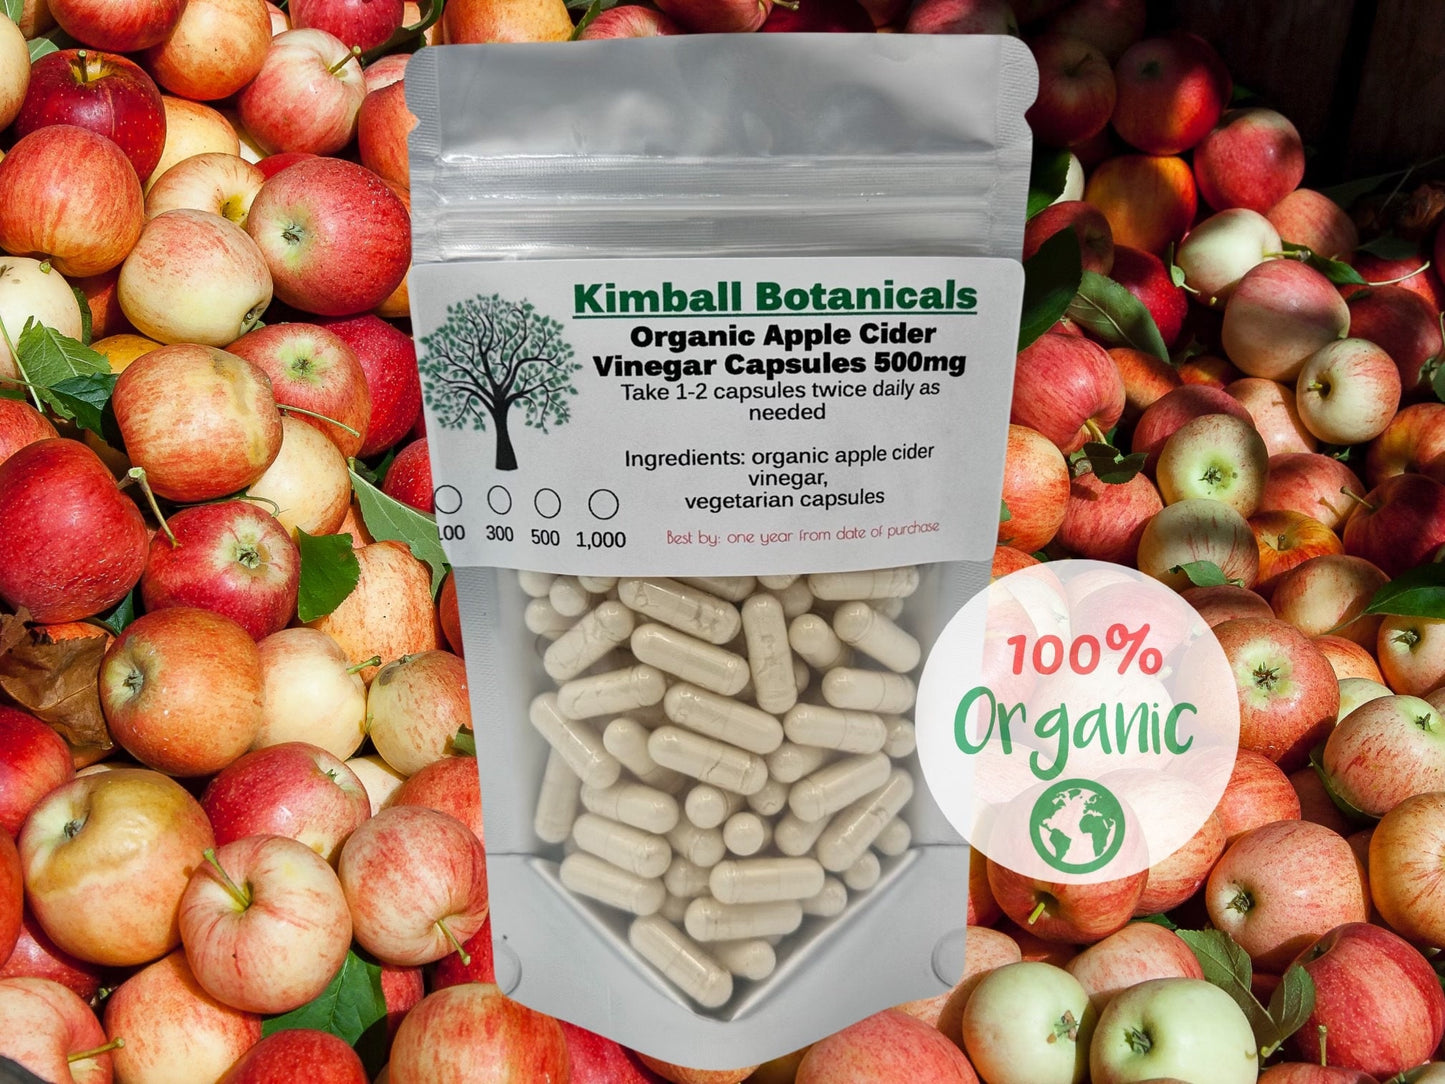 Apple cider vinegar powder 500mg vegetarian capsules made without any fillers or binders of any kind